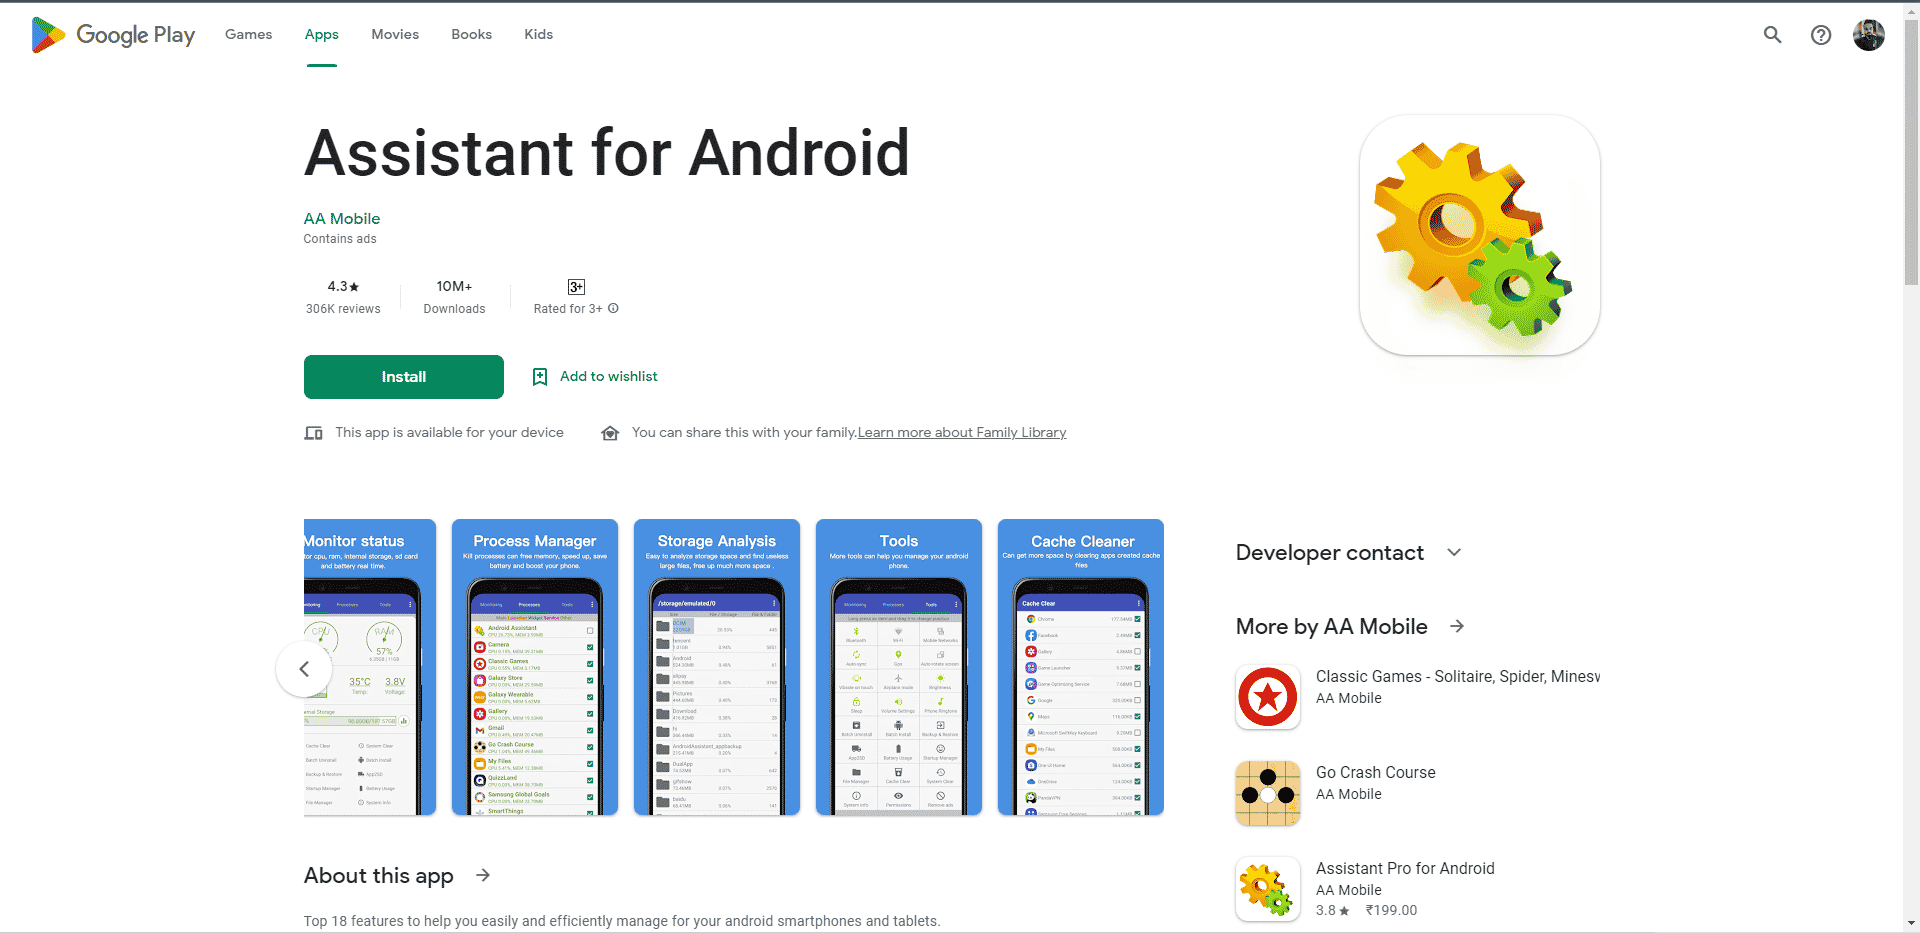 Assistant for Android app playstore webpage